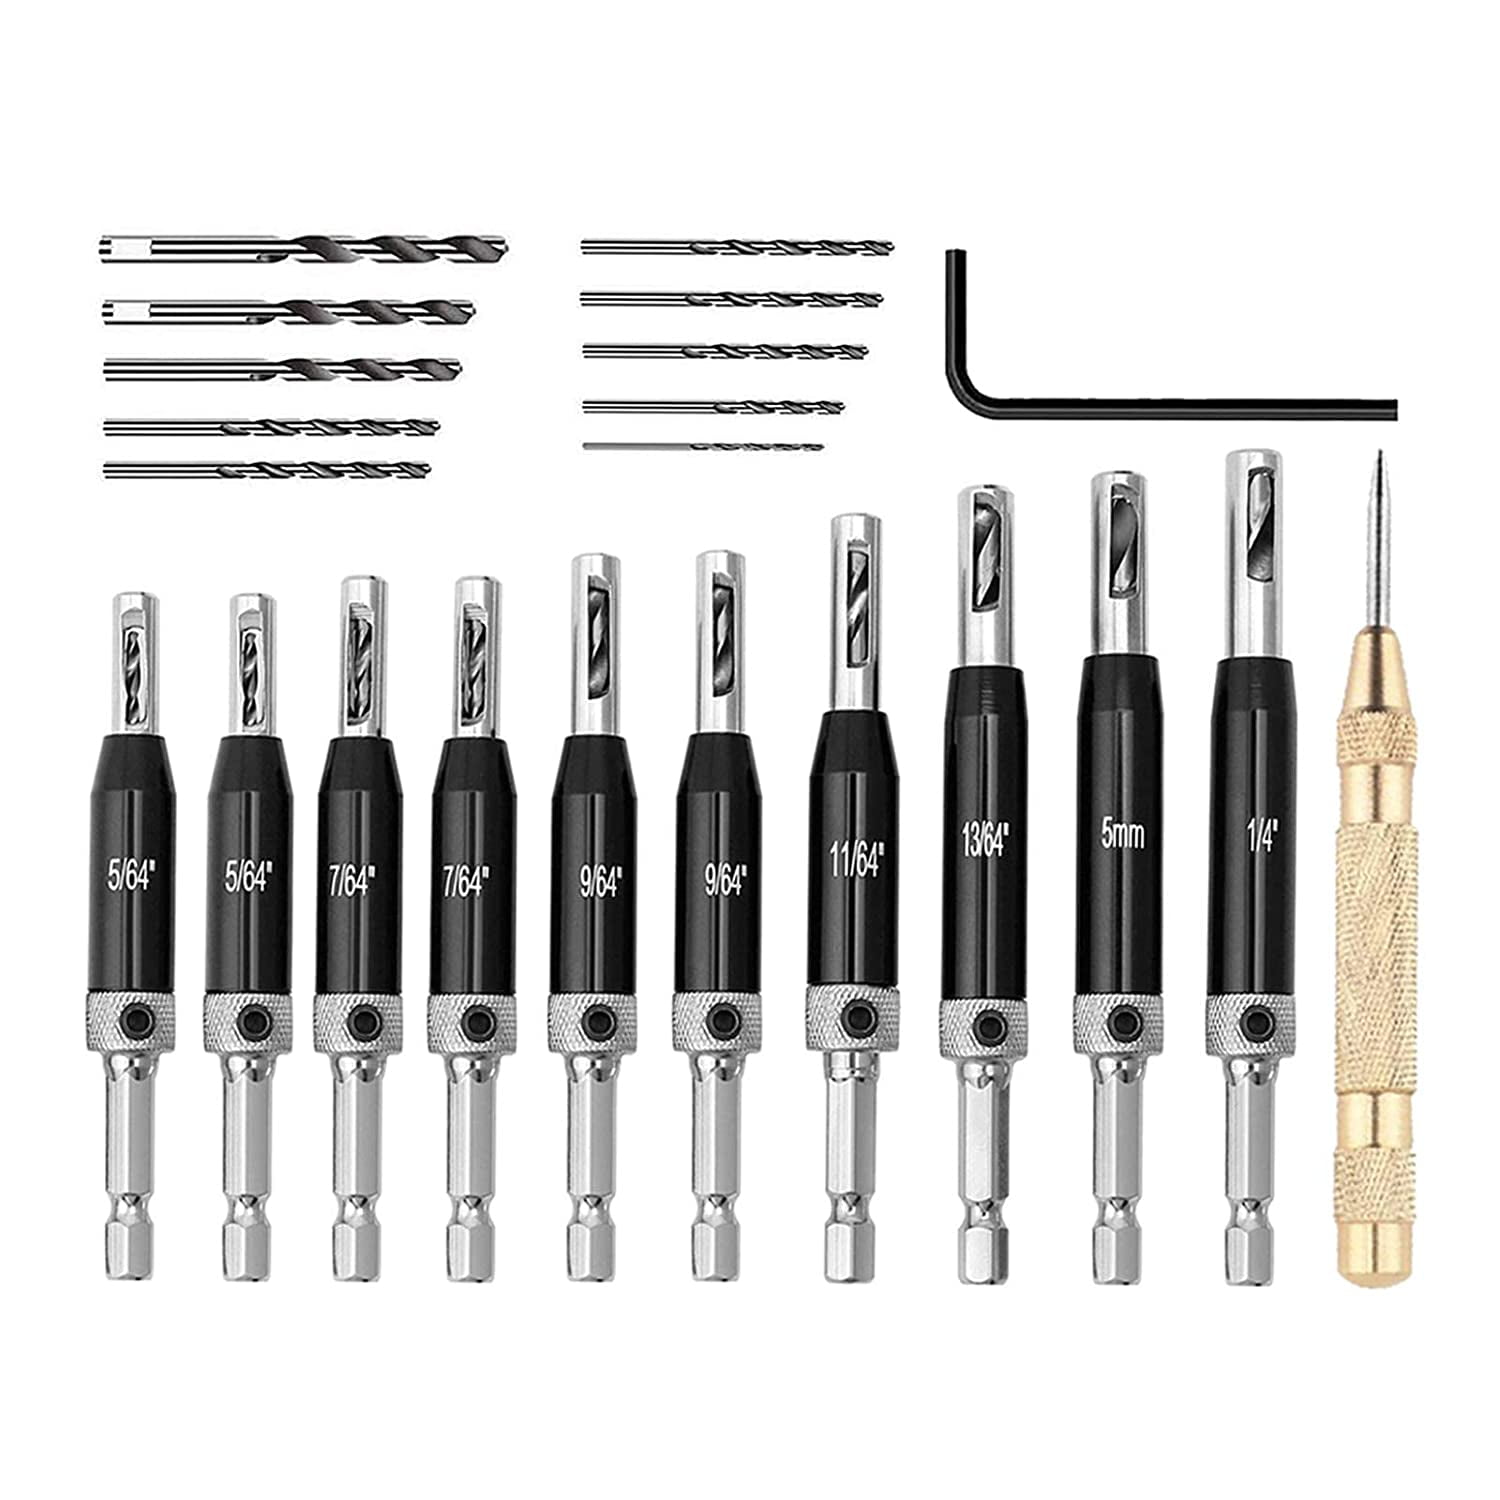 PENFU Drill Hinge Hole Puncher Drill Bit Set Professional Hinge Hole Puncher Self Centering Drill Bit with Hex Wrench for Carpenters Woodworking Door Window Tool